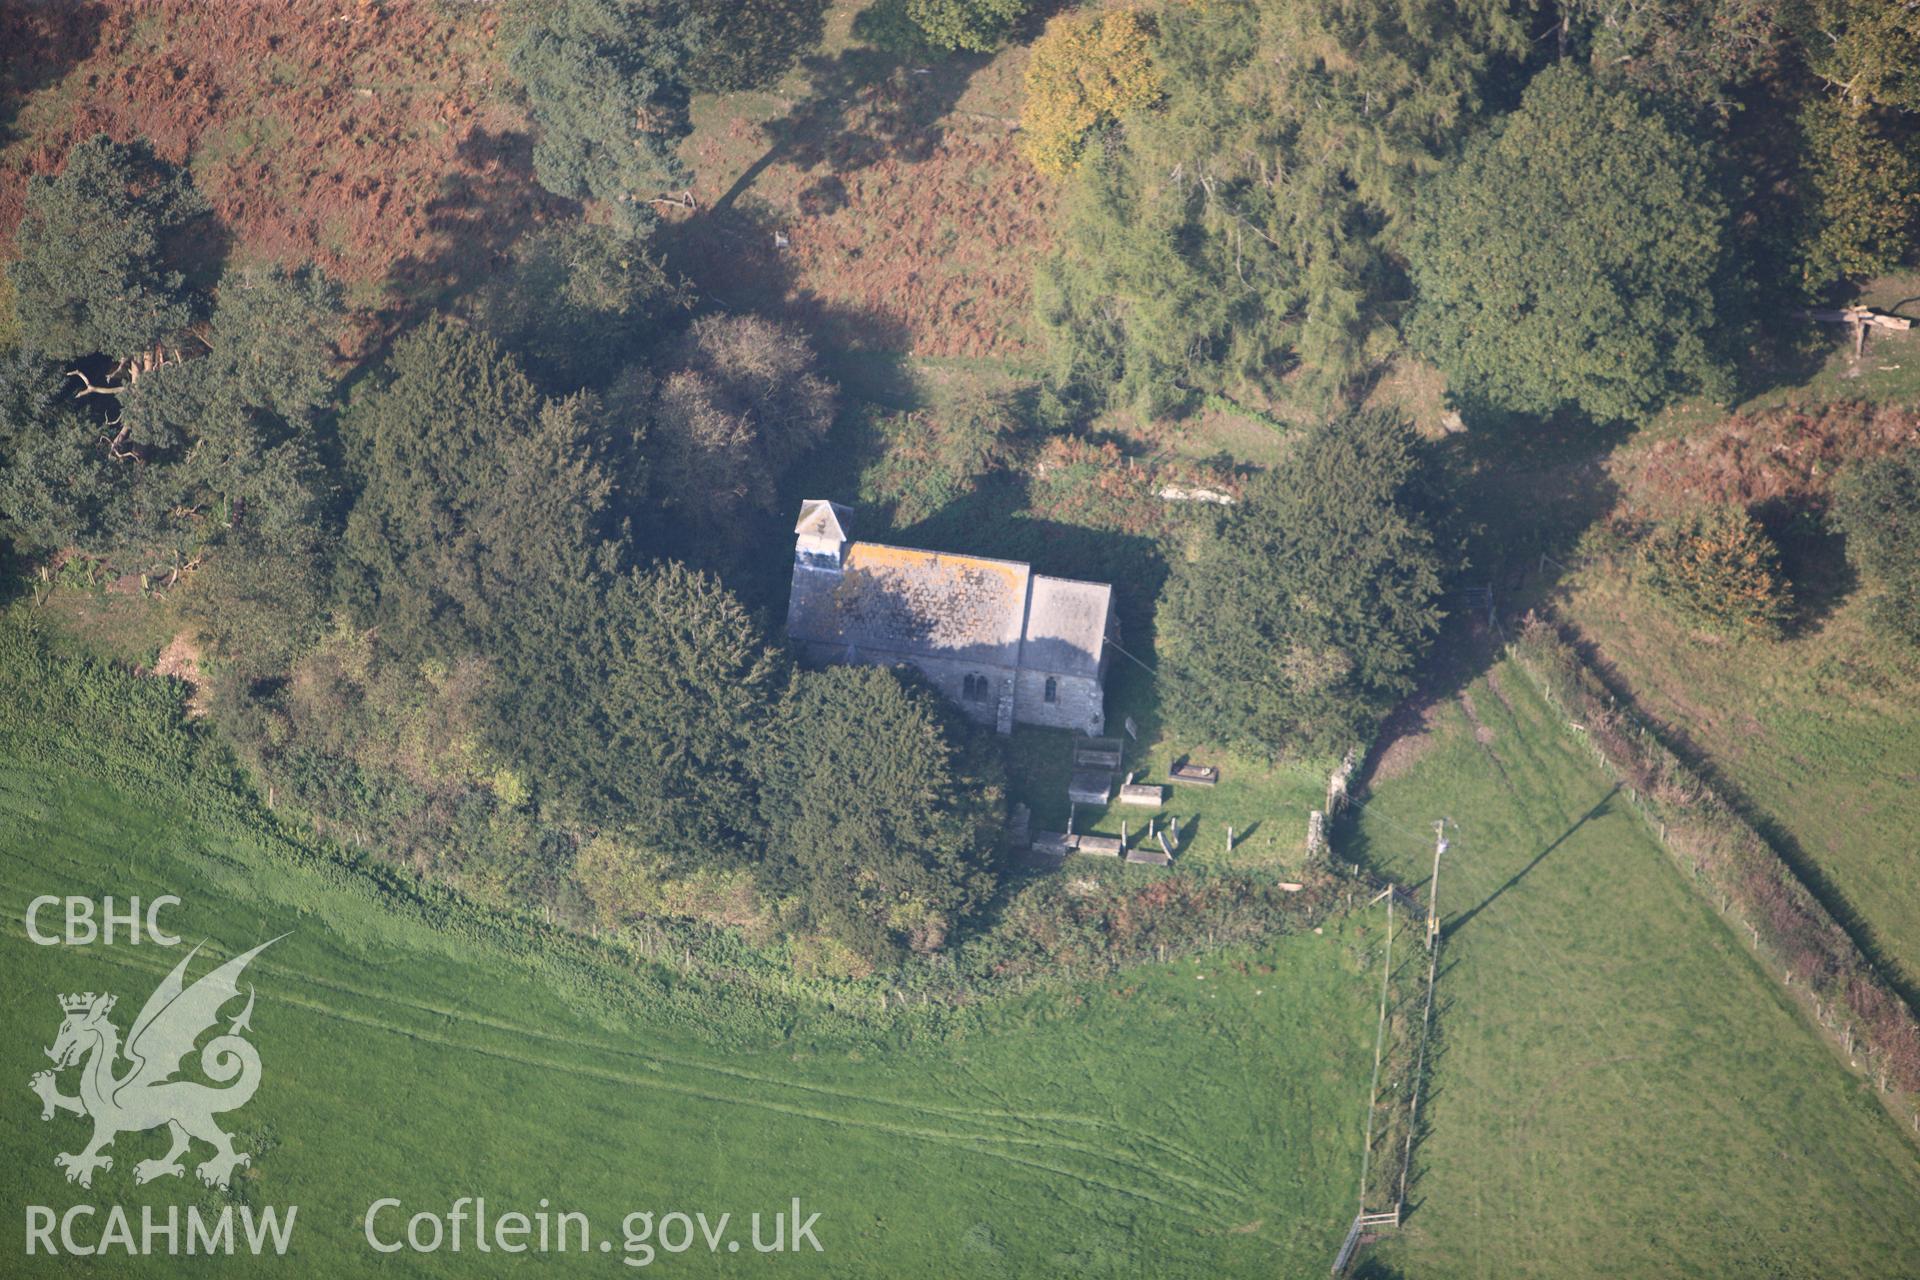 RCAHMW colour oblique photograph of Church of St David, Llanddewi Fach. Taken by Toby Driver on 13/10/2010.